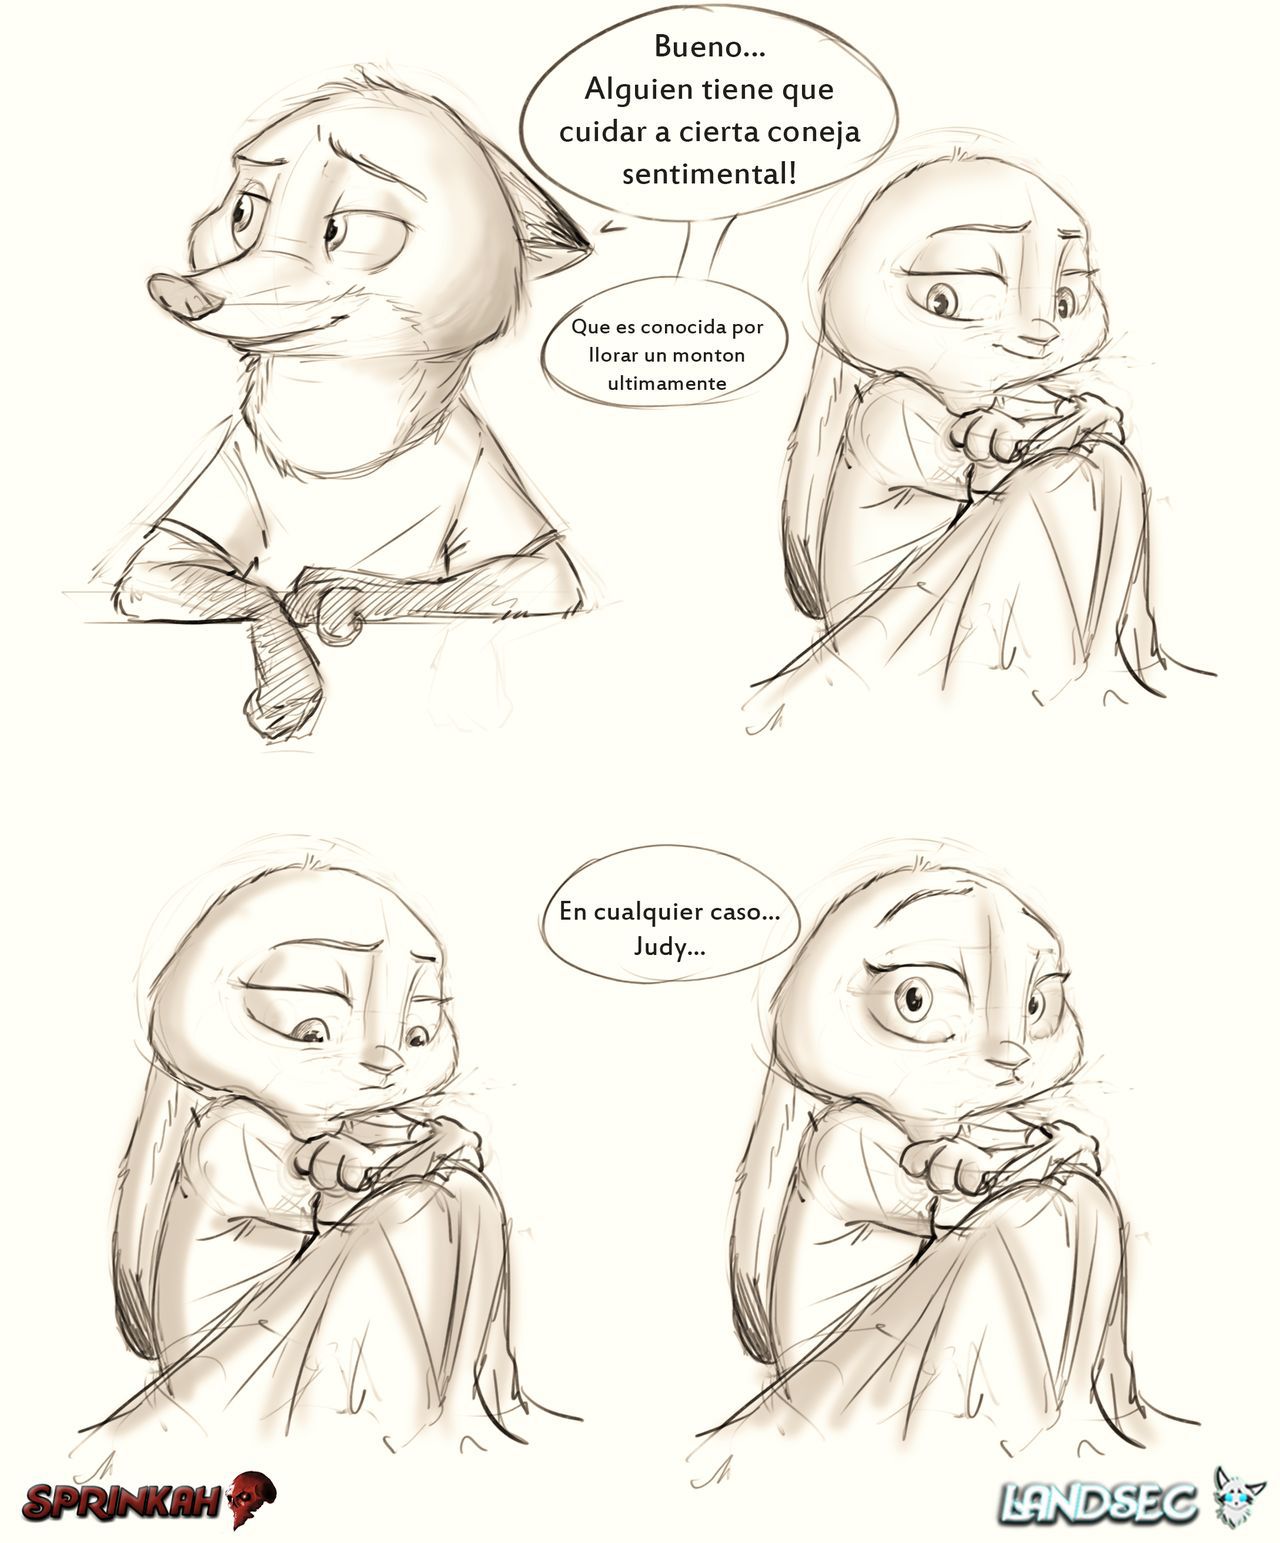 [Sprinkah] This is what true love looks like (Zootopia) (Spanish) (On Going) [Landsec] http://sprinkah.tumblr.com/ 44